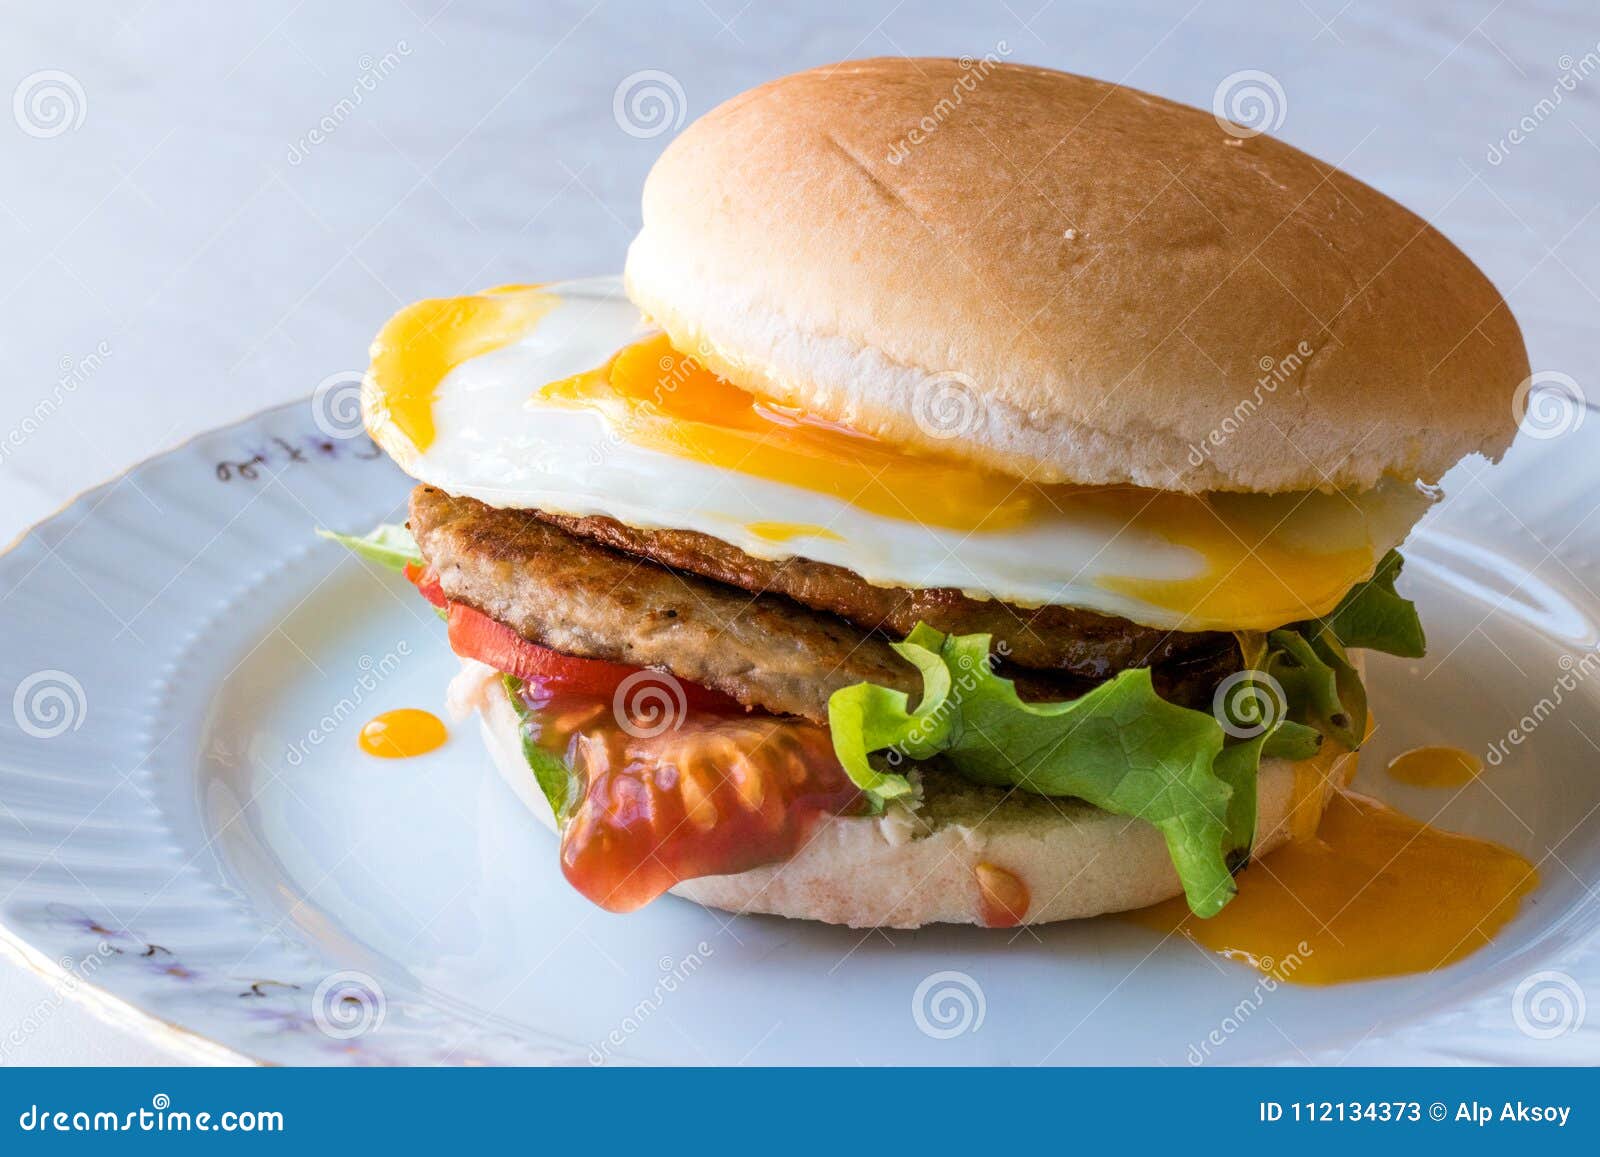 Homemade Double Hamburger with Egg, Lettuce and Tomatoes. Stock Image ...